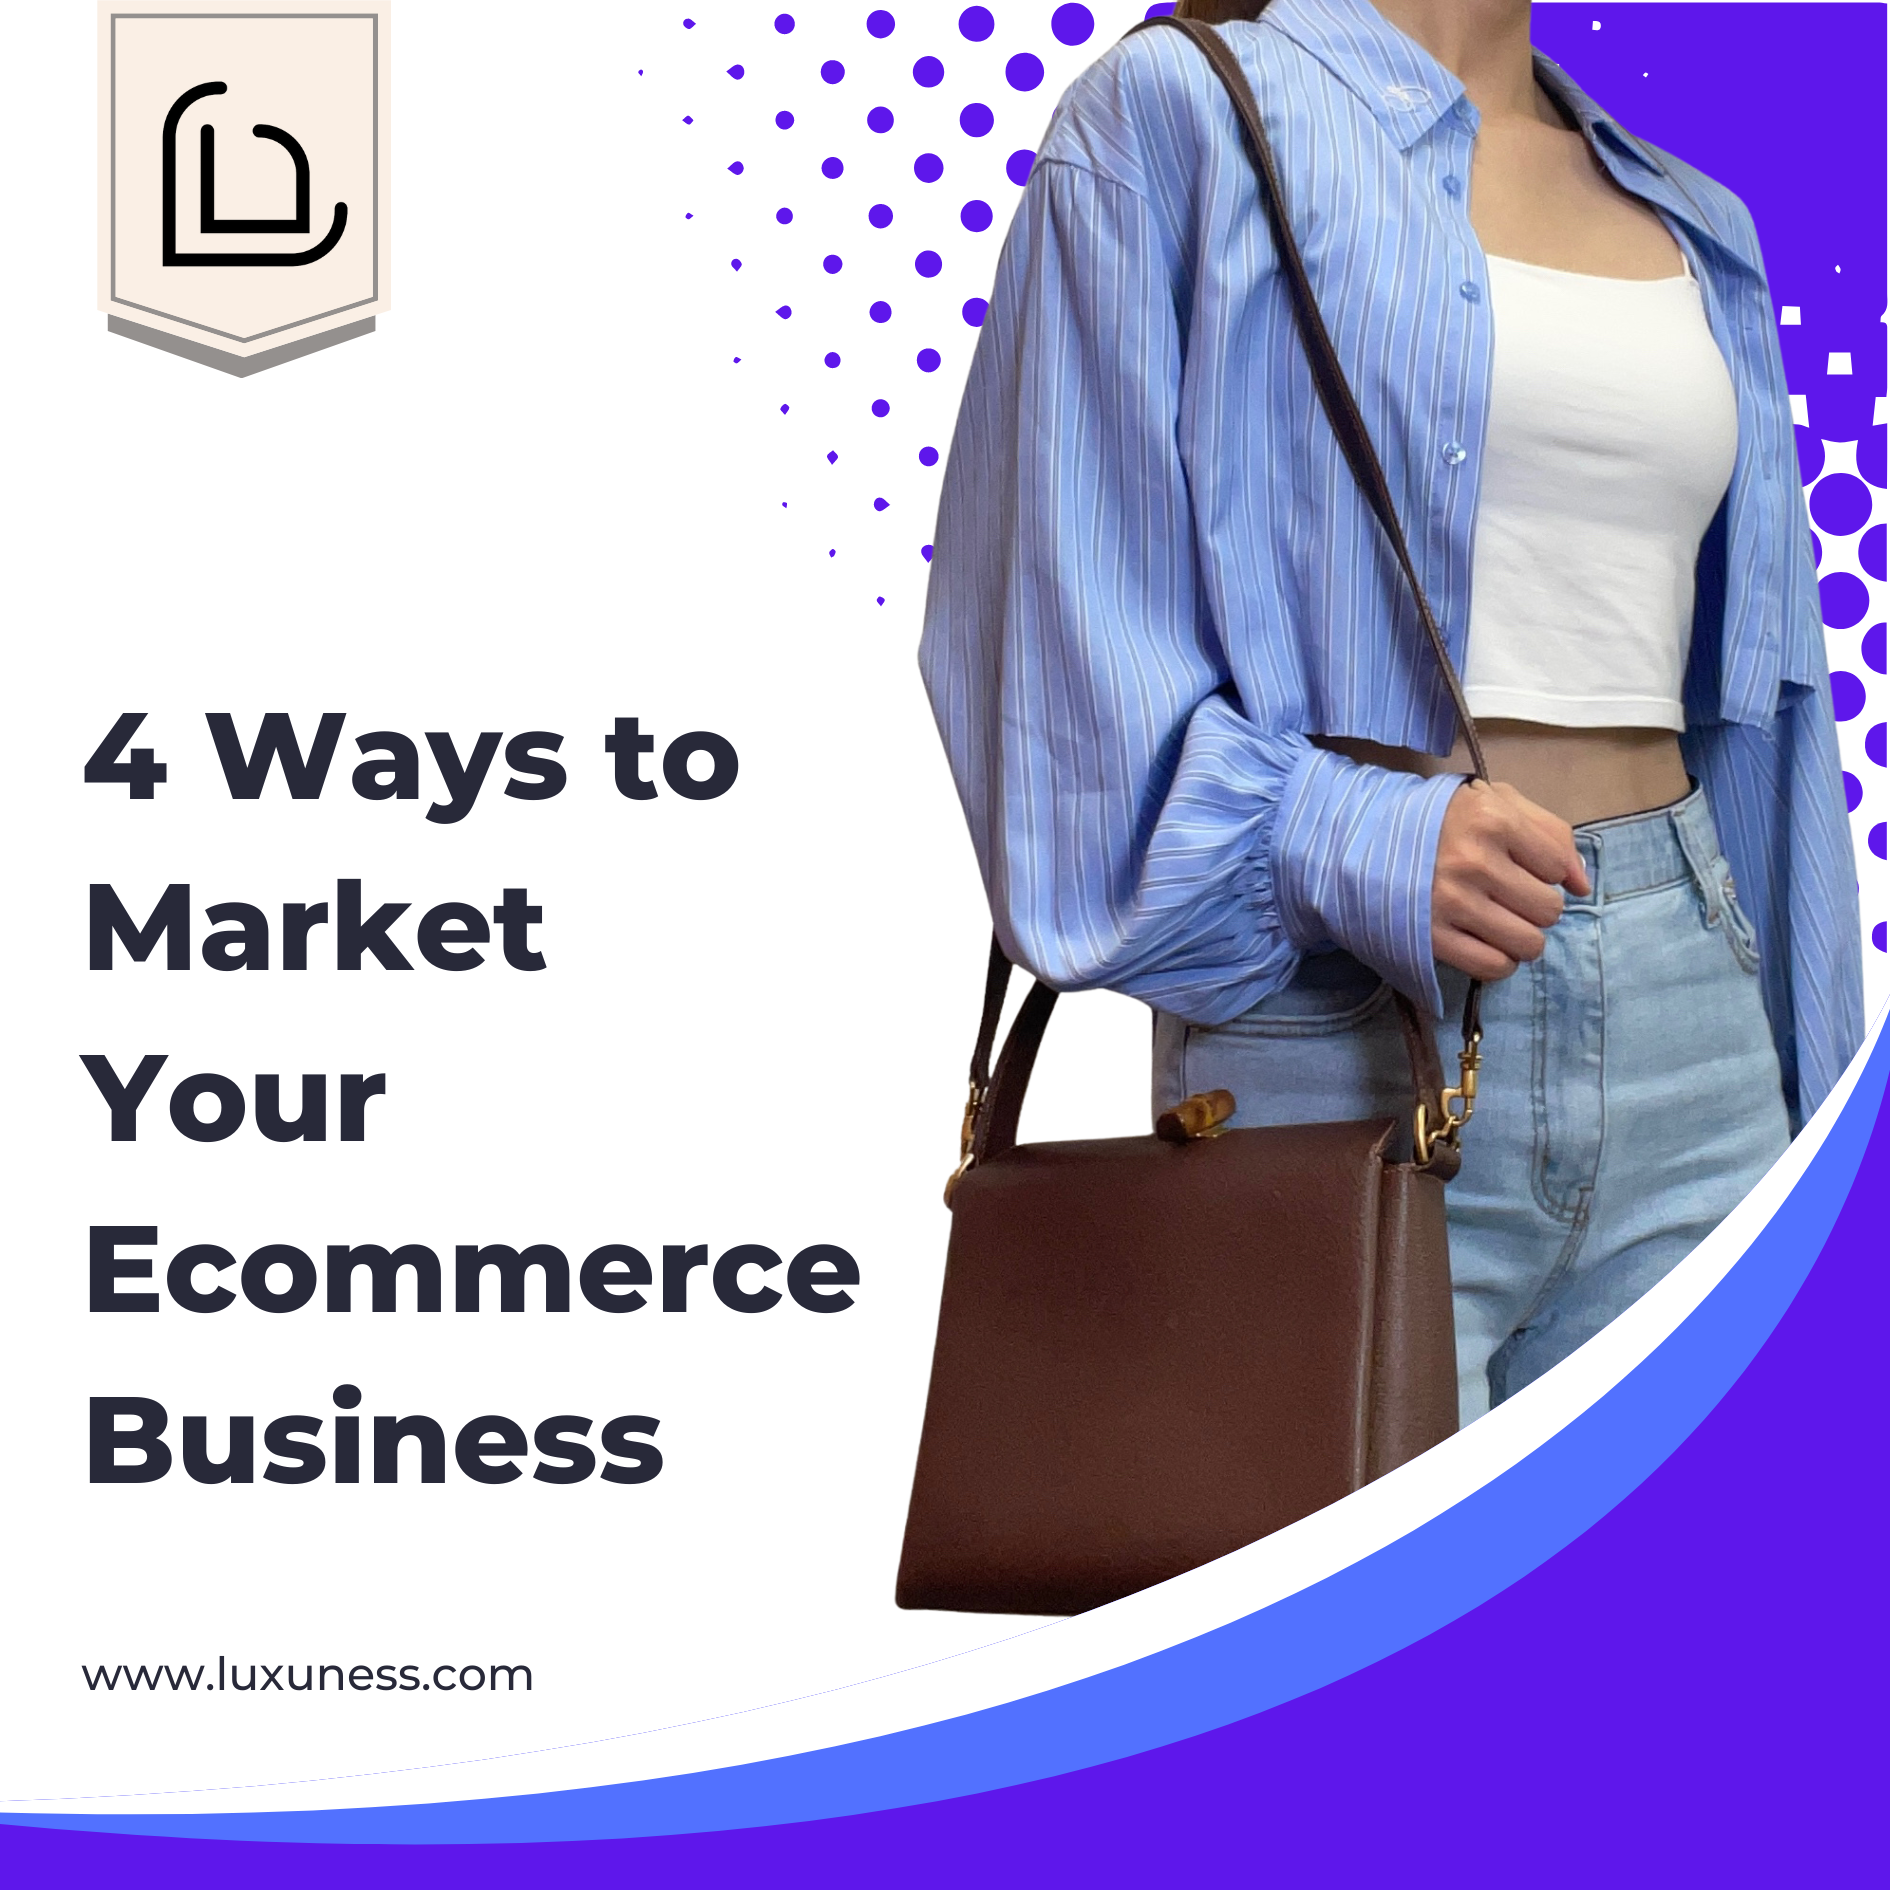 4 Ways to Market Your Ecommerce Business